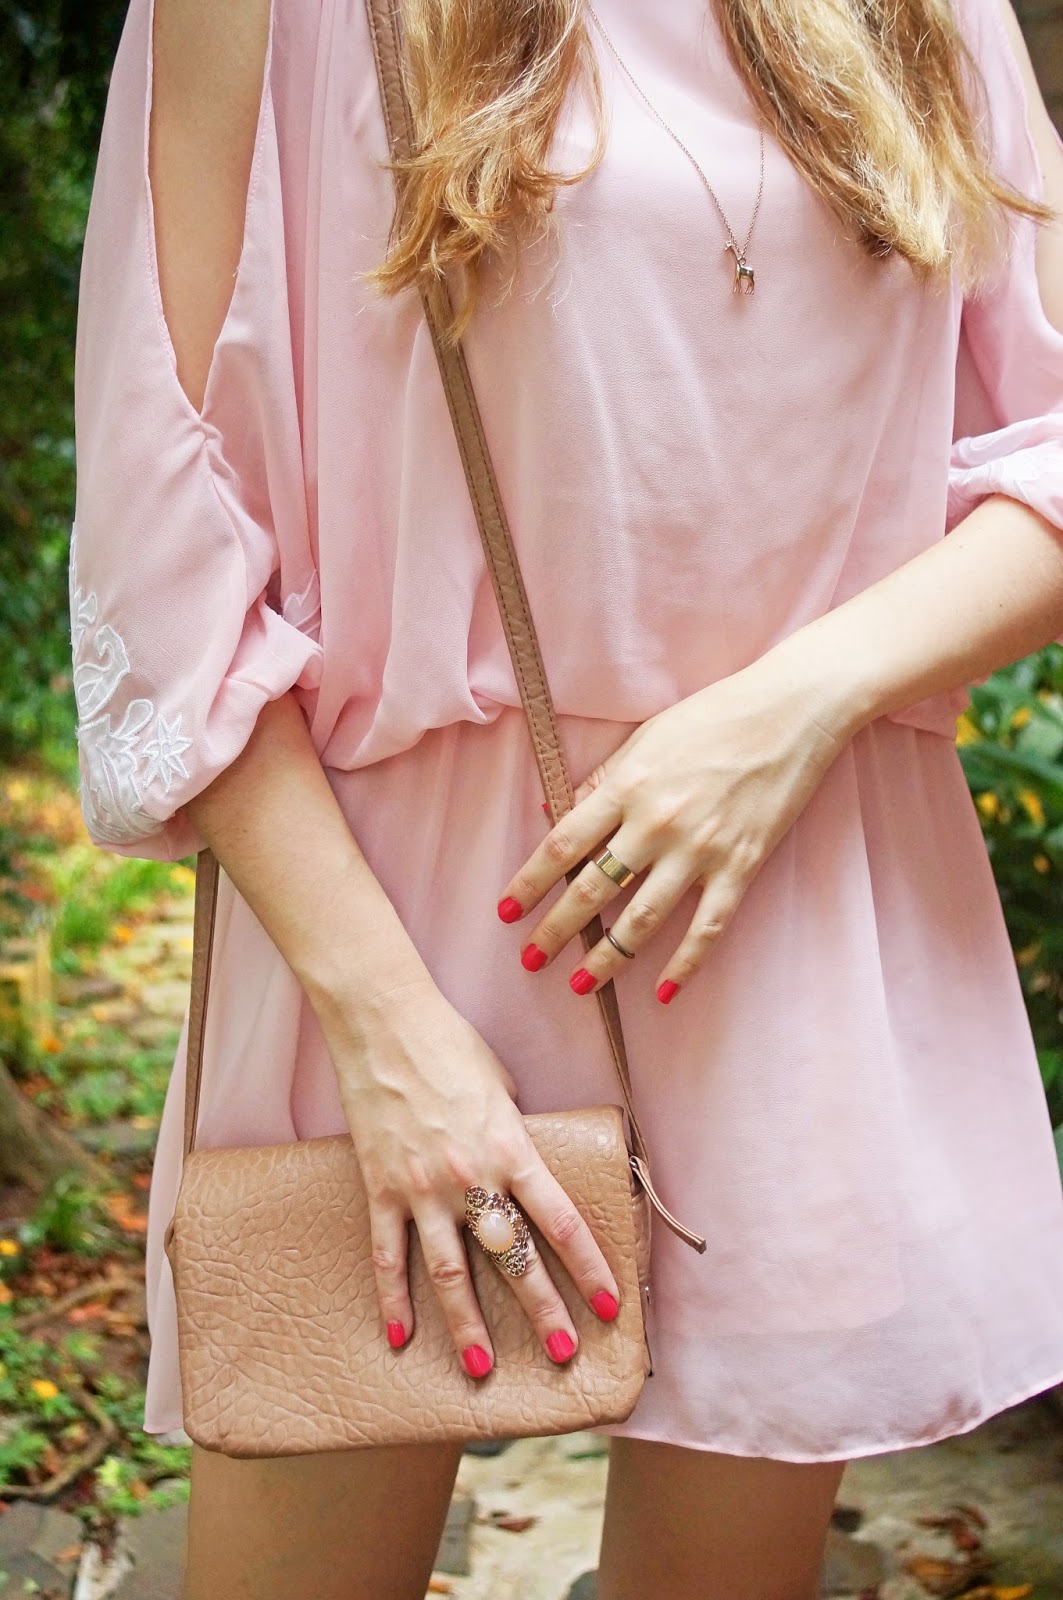 Loving this pink dress and cute accessories!